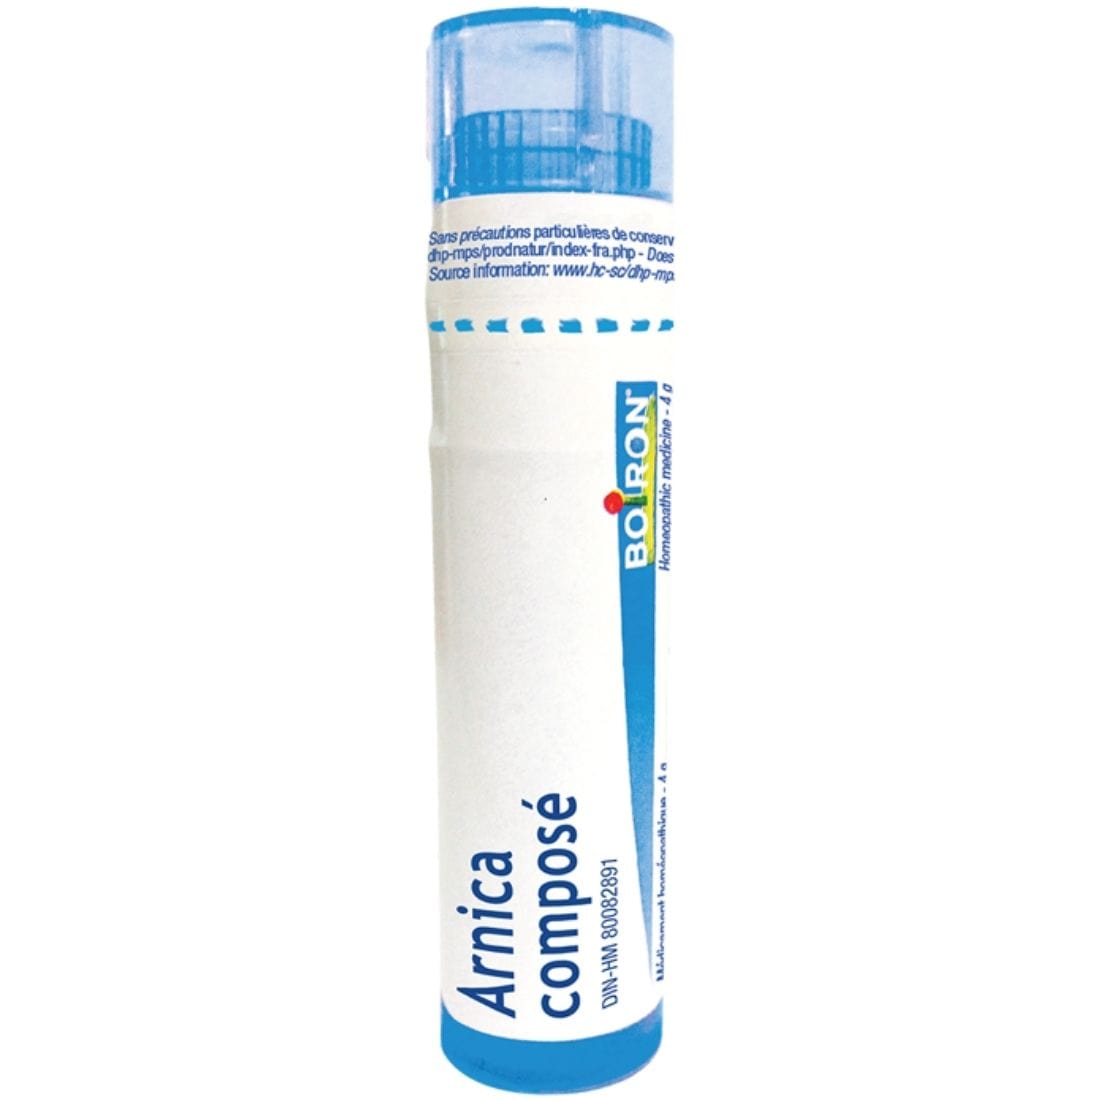 Boiron Arnica Compose, Pain Relief